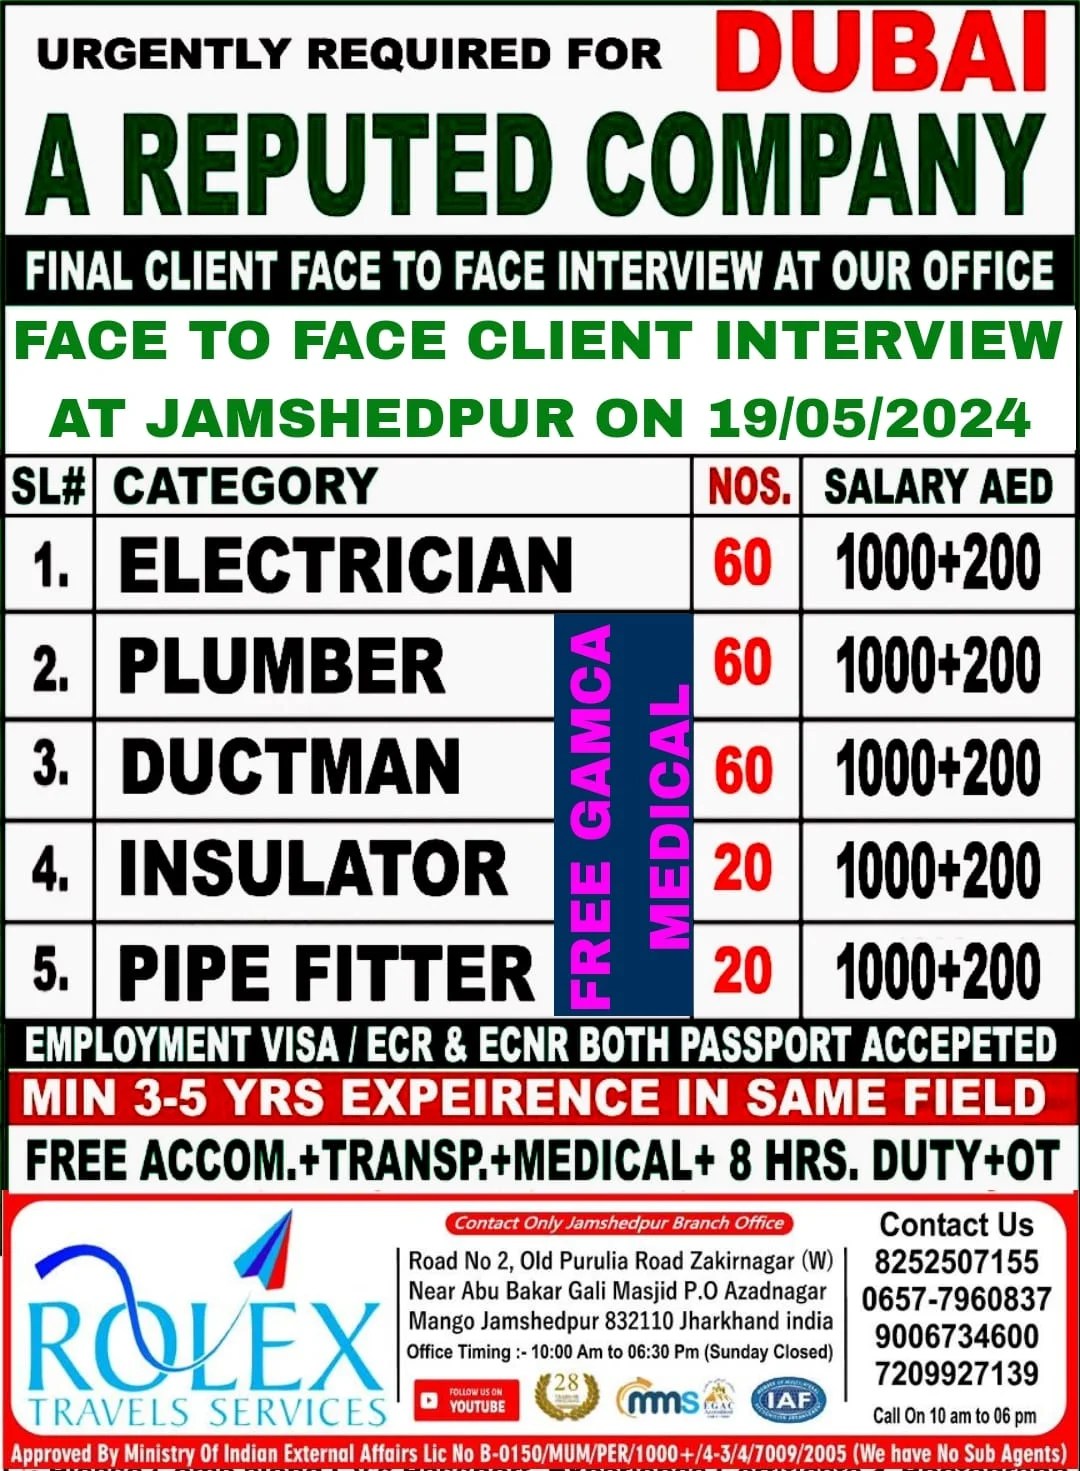 Recruitment for dubai a reputed company - interview at jamshedpur